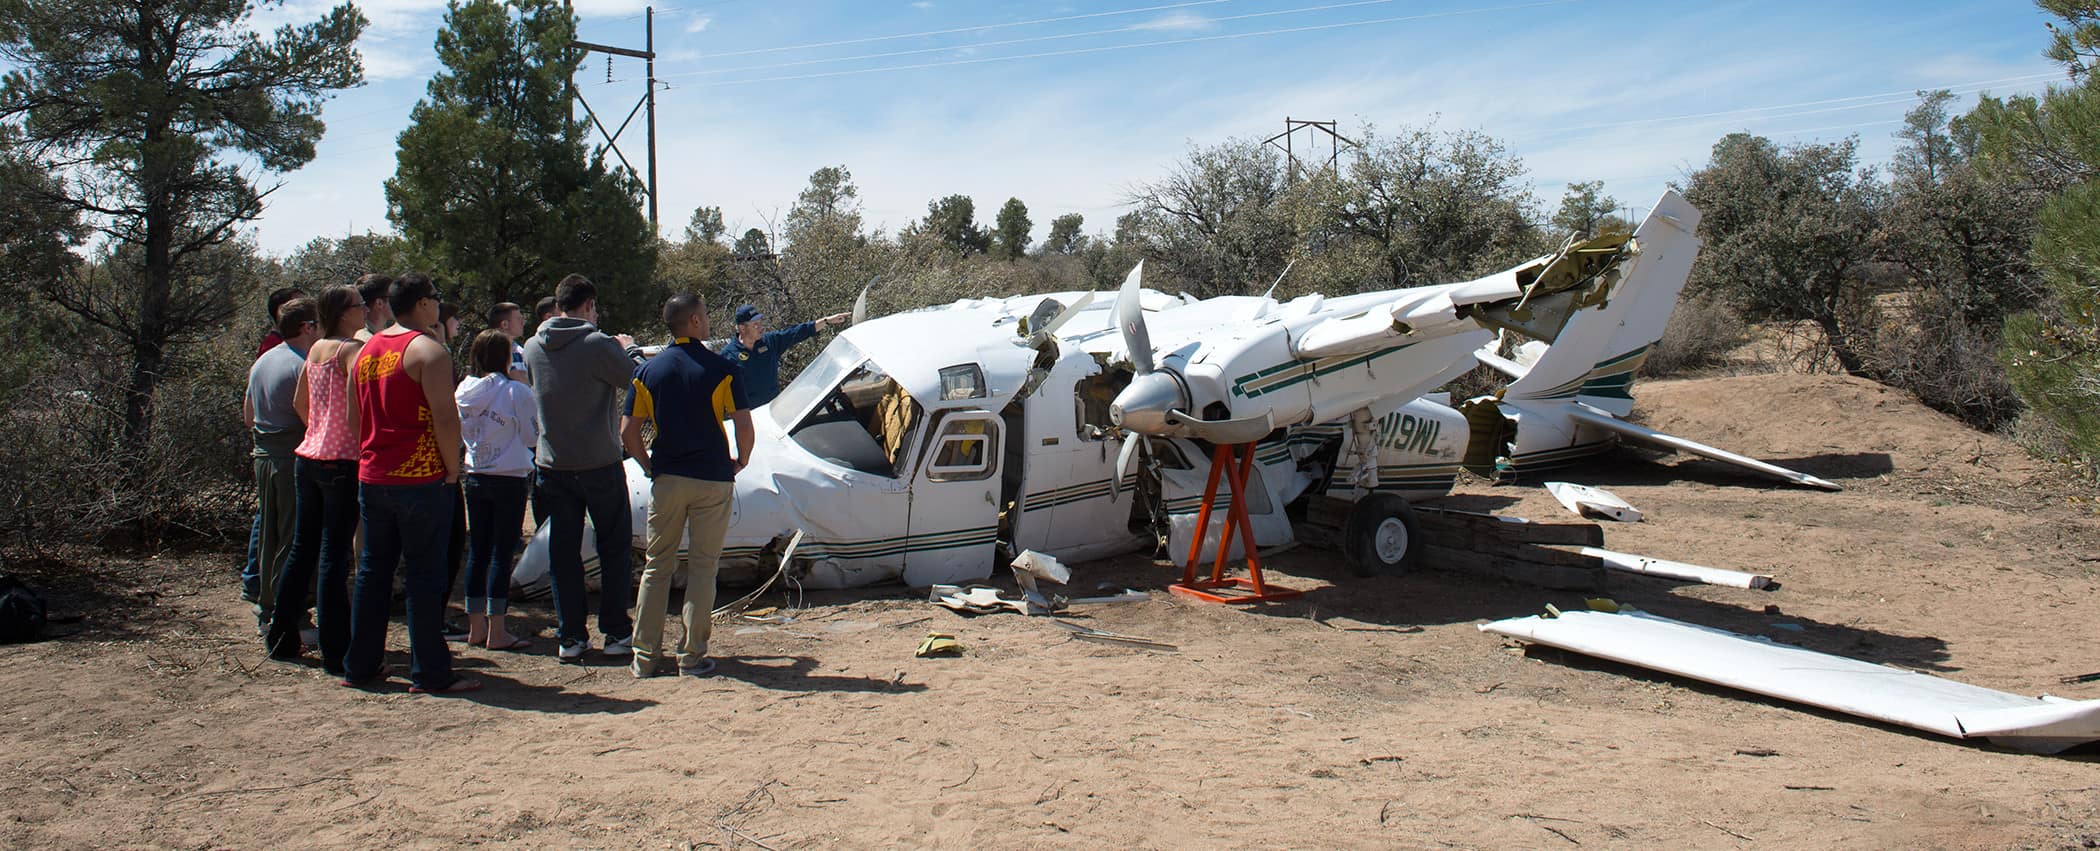 A group of students gather near a crashed plane